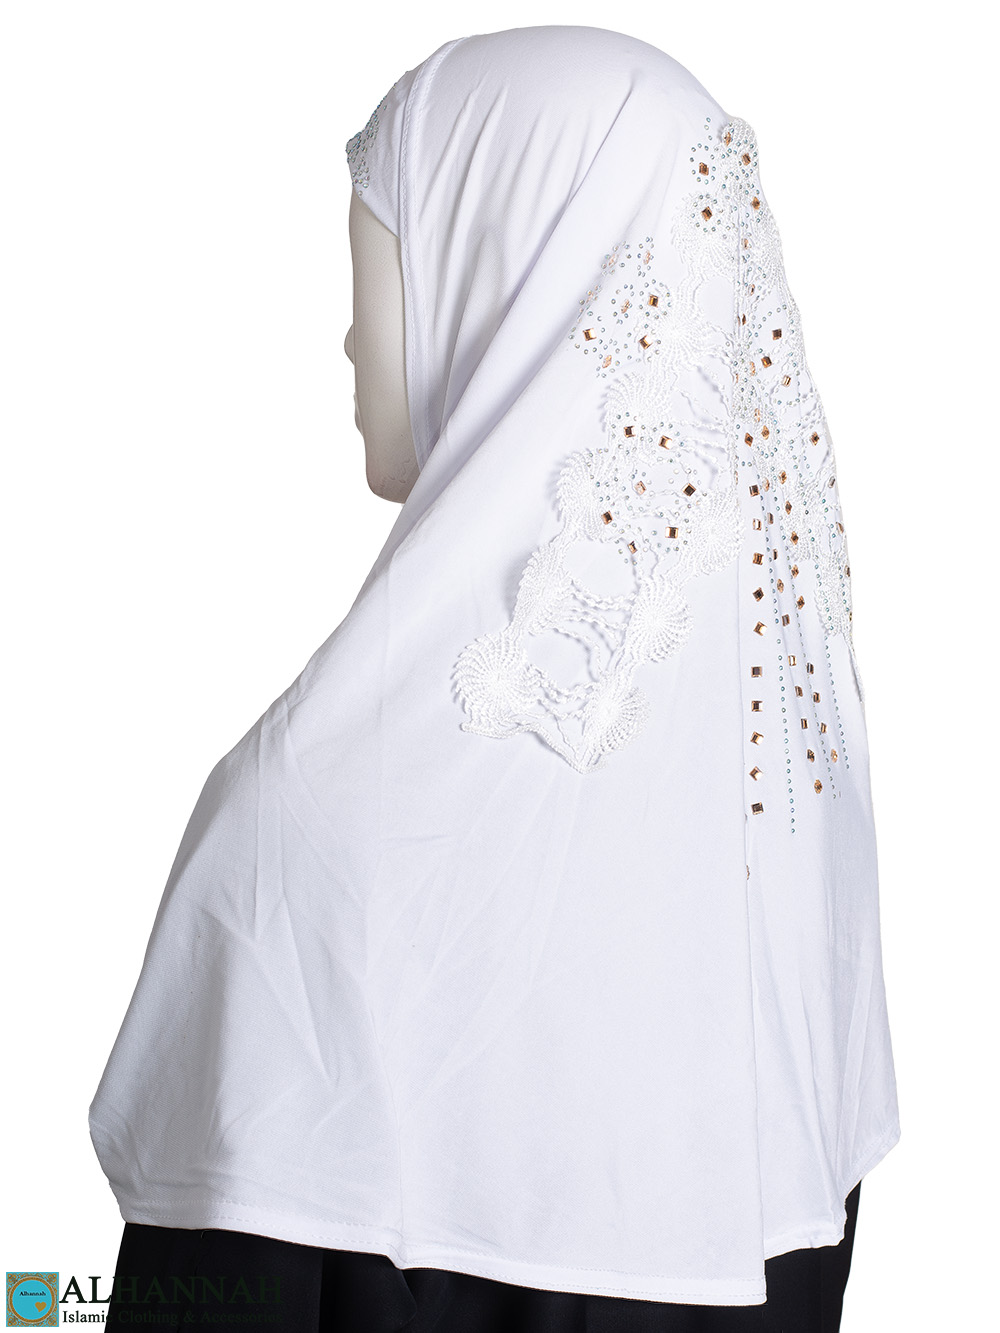 Amira Hijab with Floral Applique - White hi2444